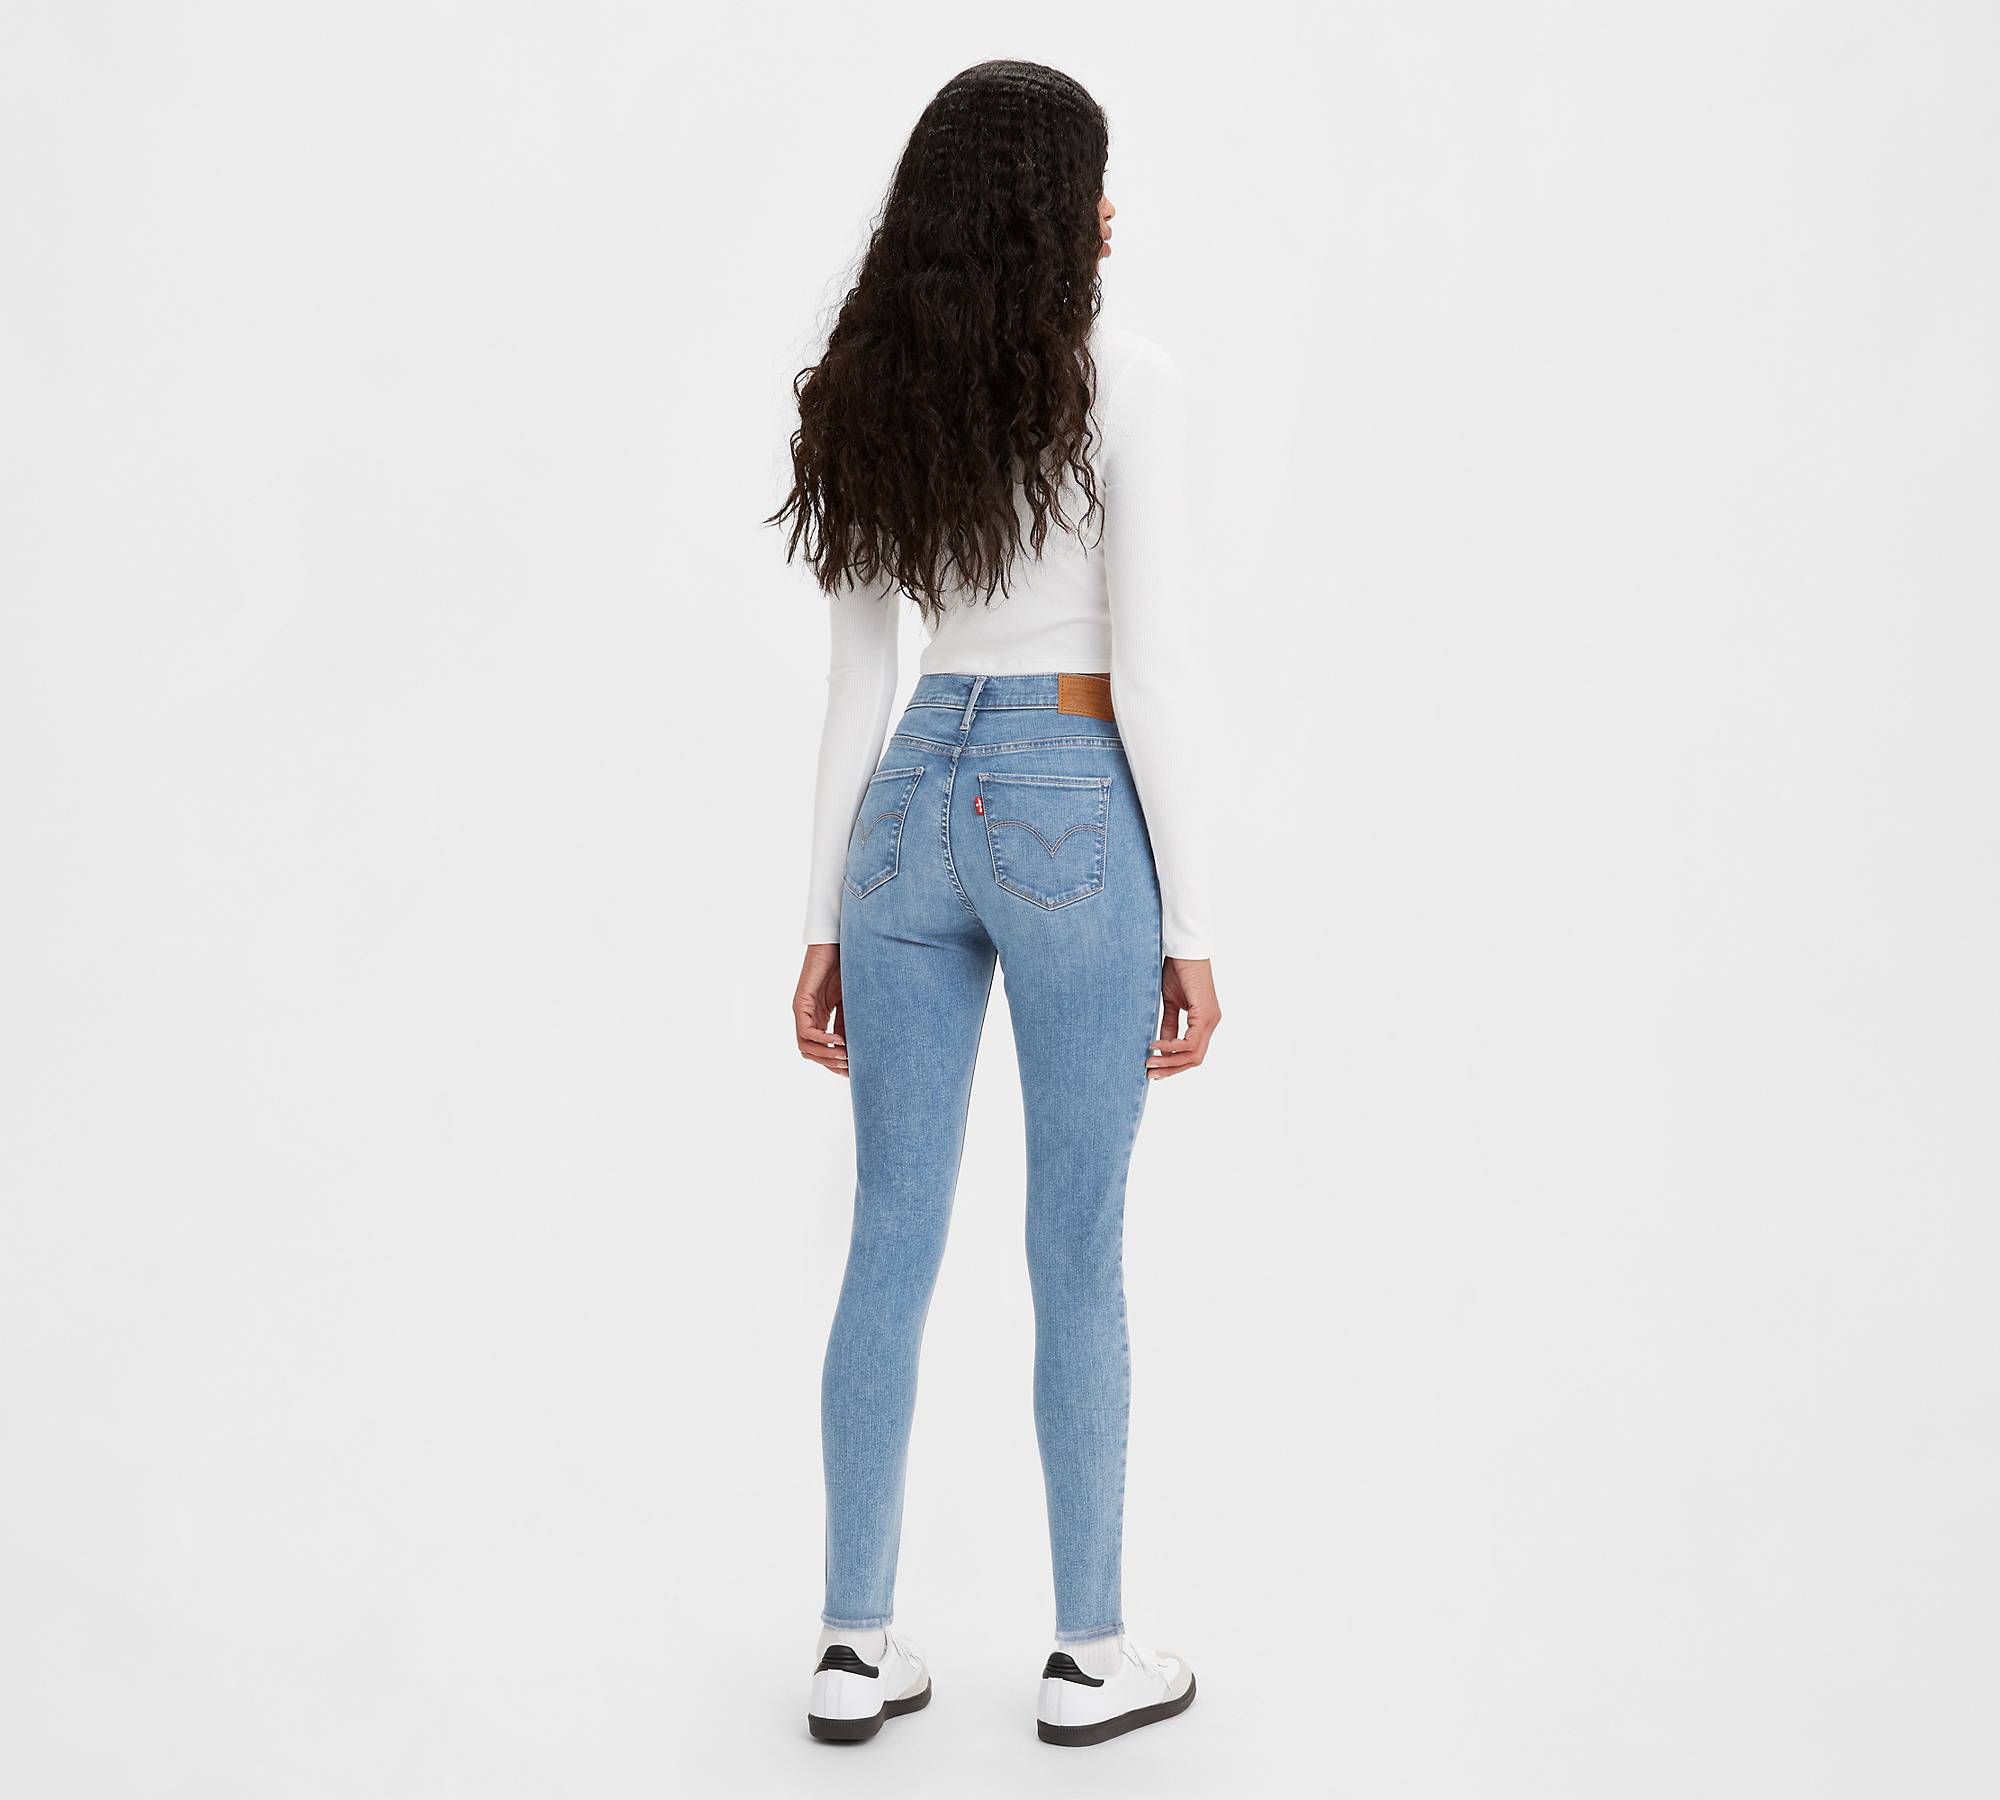 High Rise Jeans - High Rise Pants & Super High Waisted Jeans